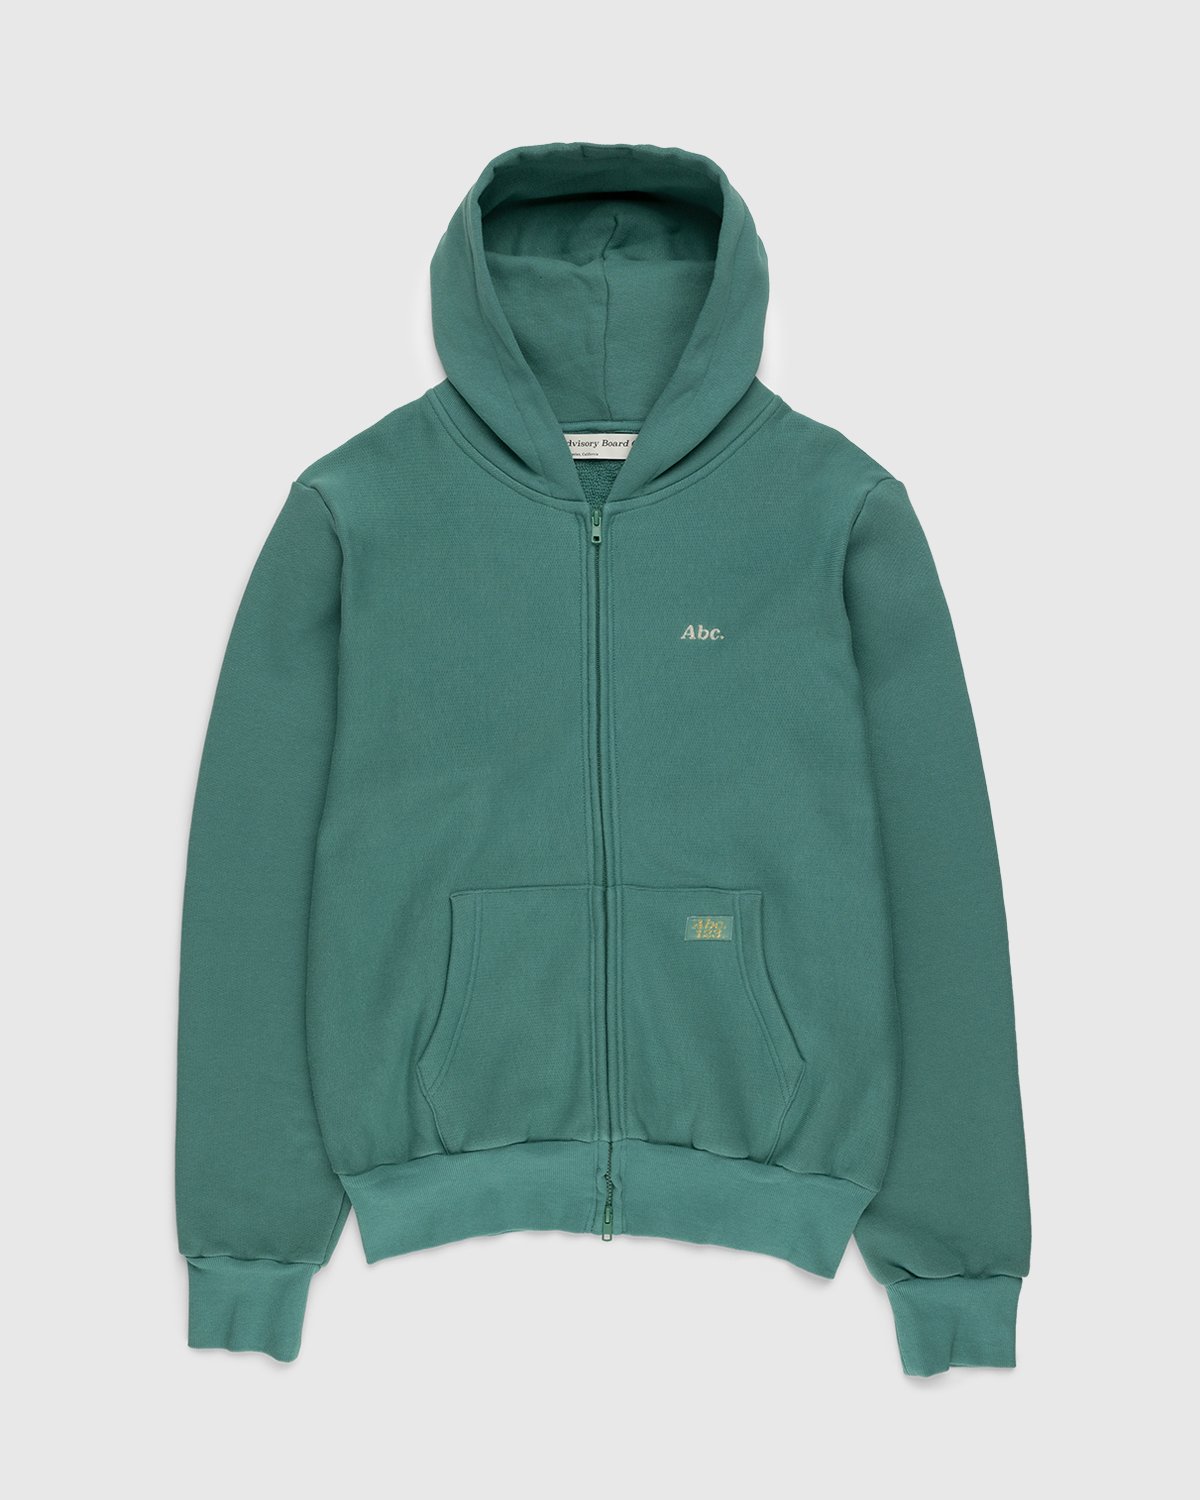 Abc. - Zip-Up French Terry Hoodie Apatite - Clothing - Green - Image 1